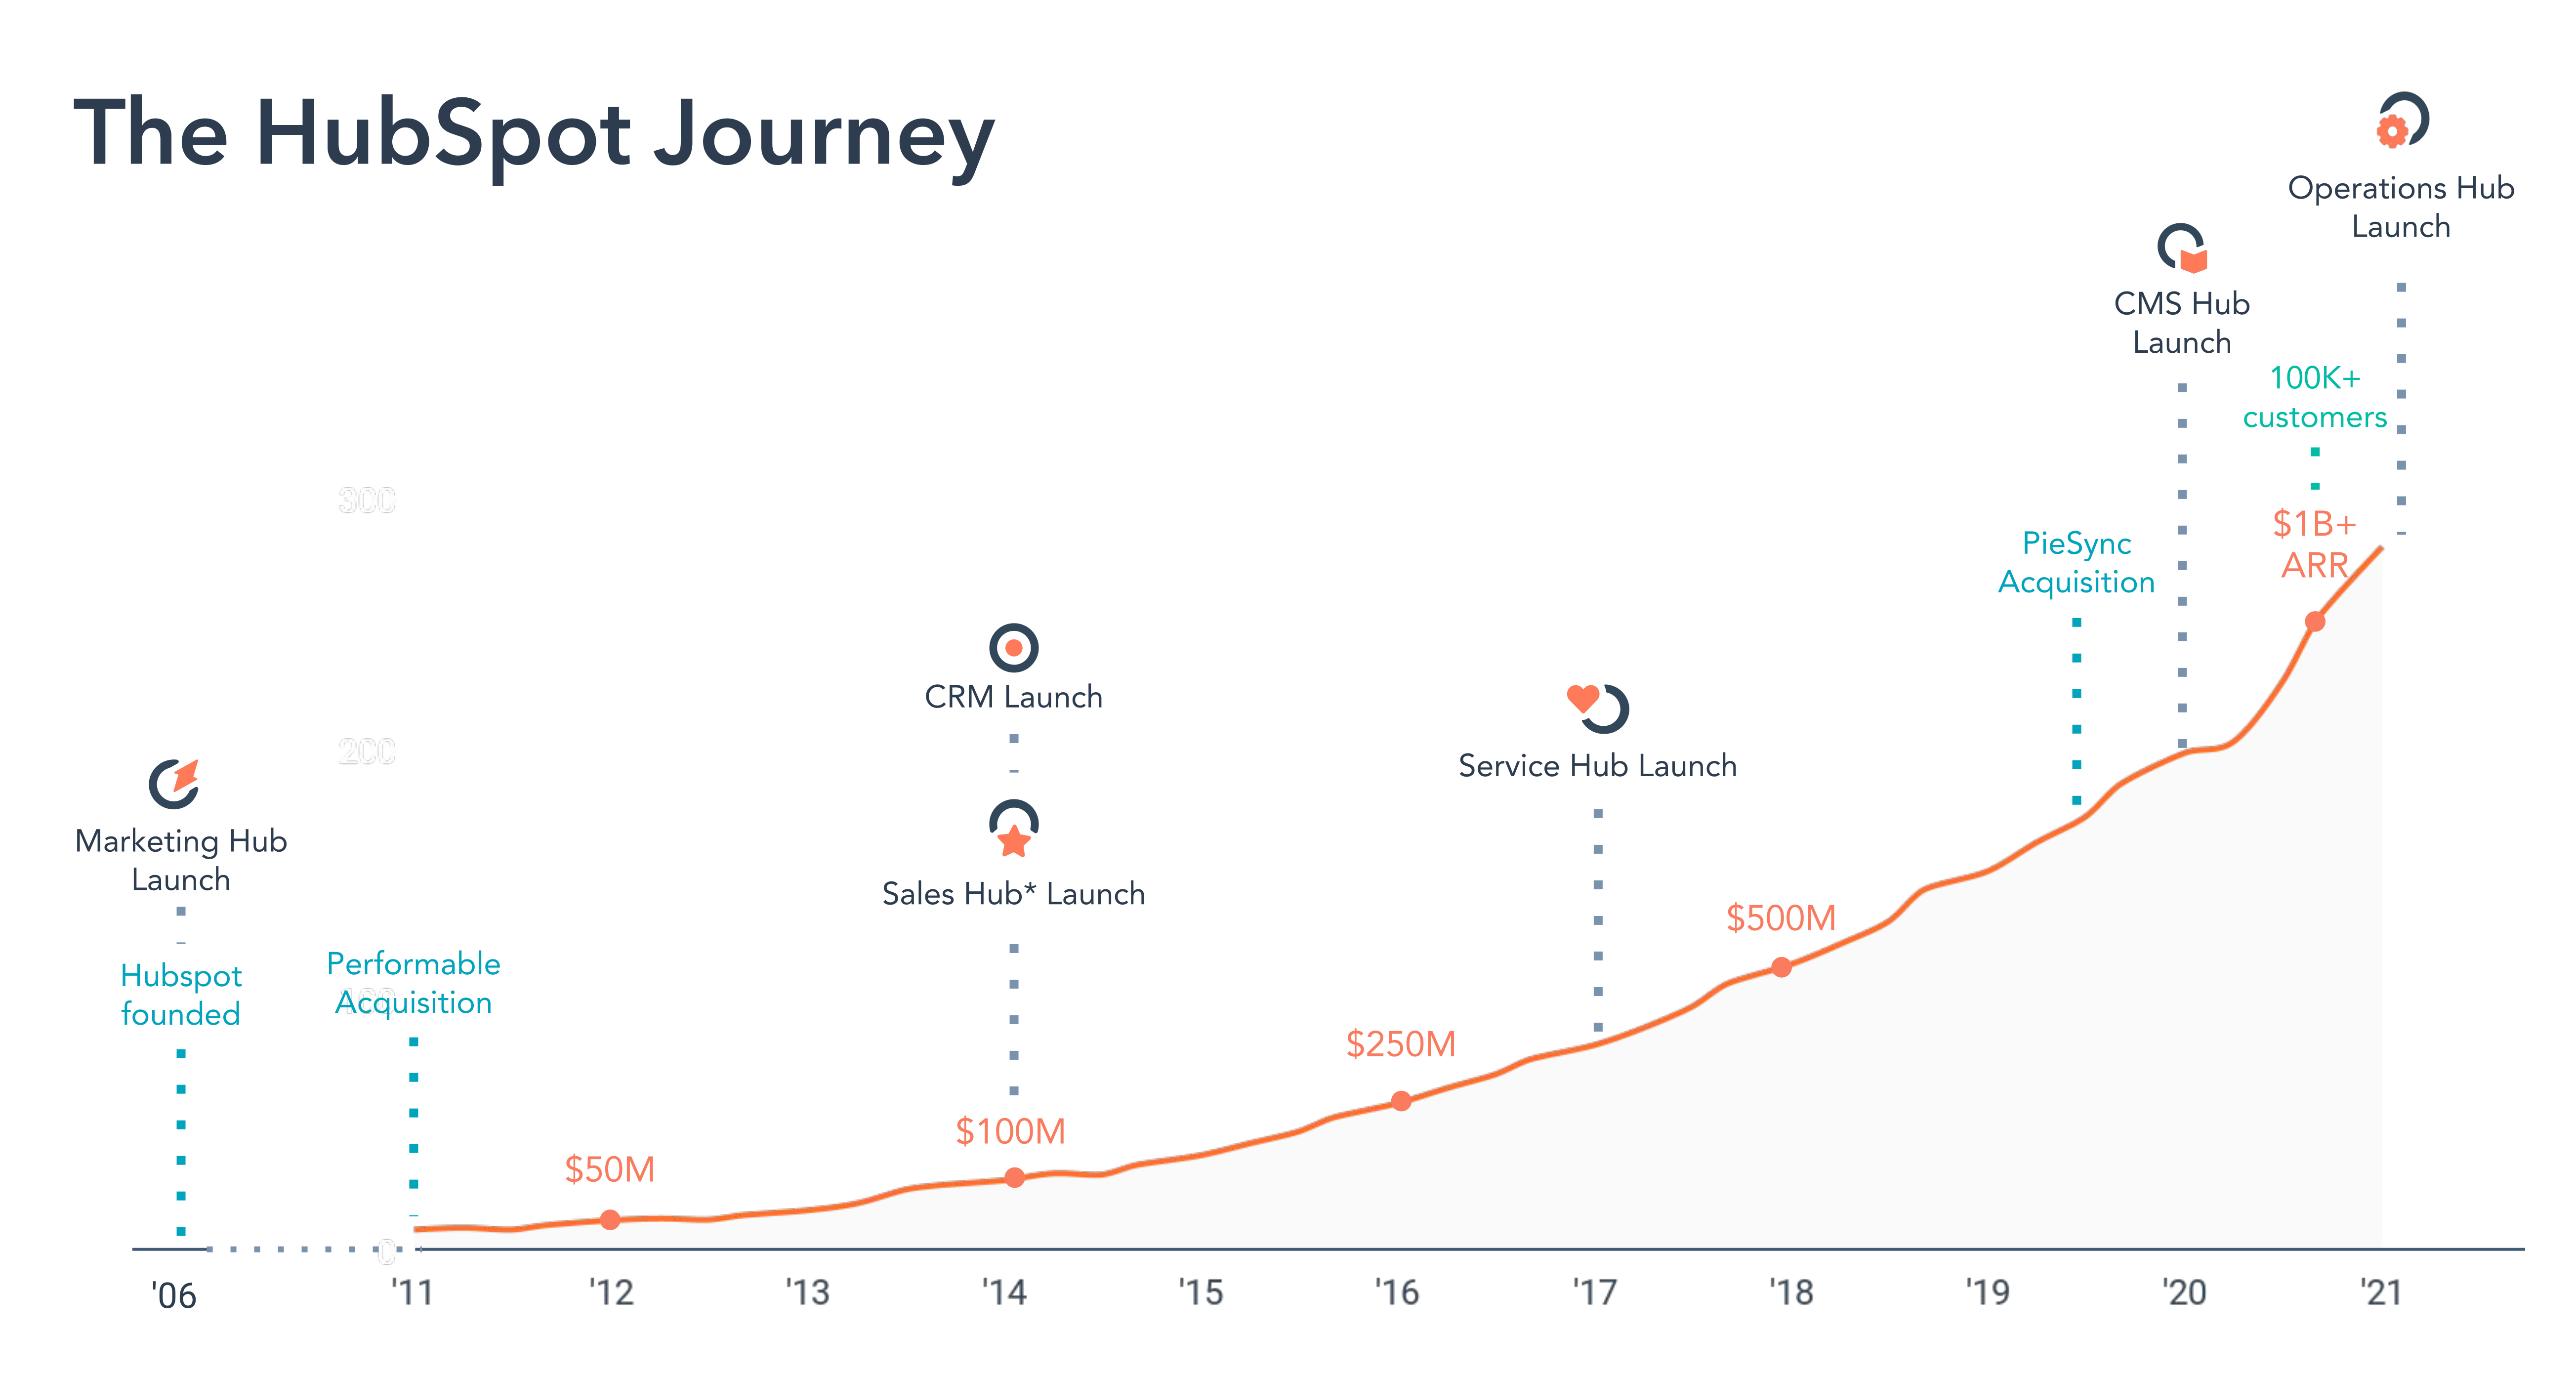 Hubspot's growth curve over time, generally quadratic but exhibits that wavy behavior